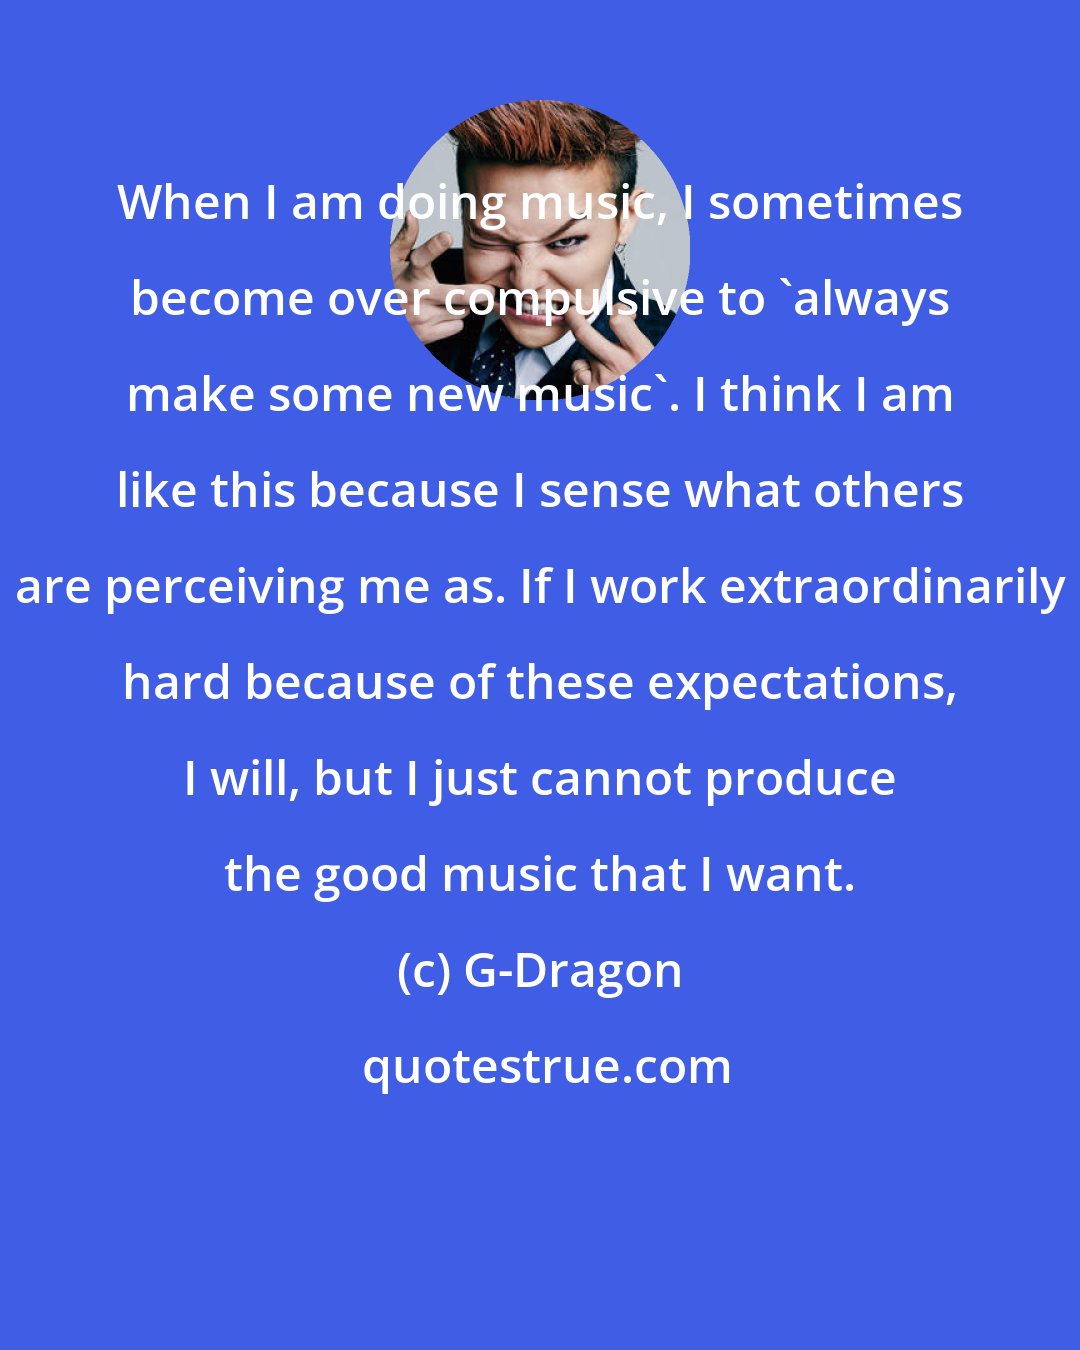 G-Dragon: When I am doing music, I sometimes become over compulsive to 'always make some new music'. I think I am like this because I sense what others are perceiving me as. If I work extraordinarily hard because of these expectations, I will, but I just cannot produce the good music that I want.